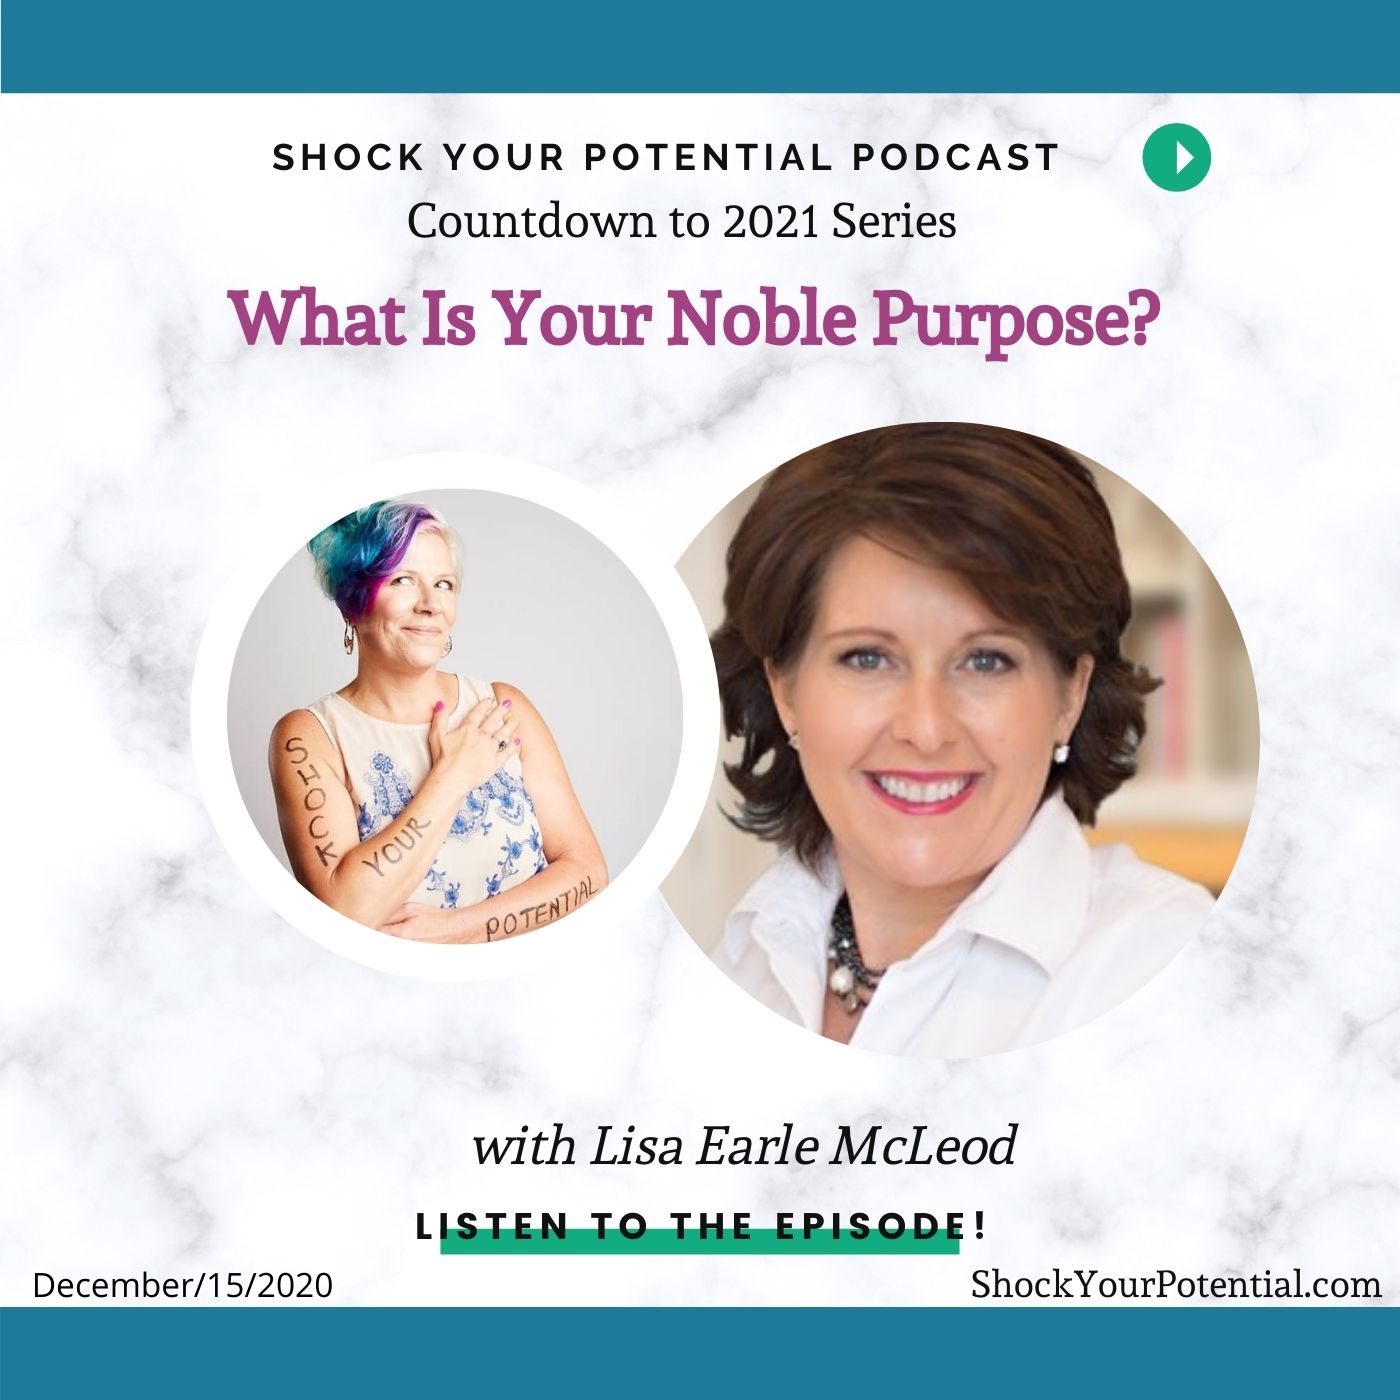 What Is Your Noble Purpose?- Lisa Earle McLeod